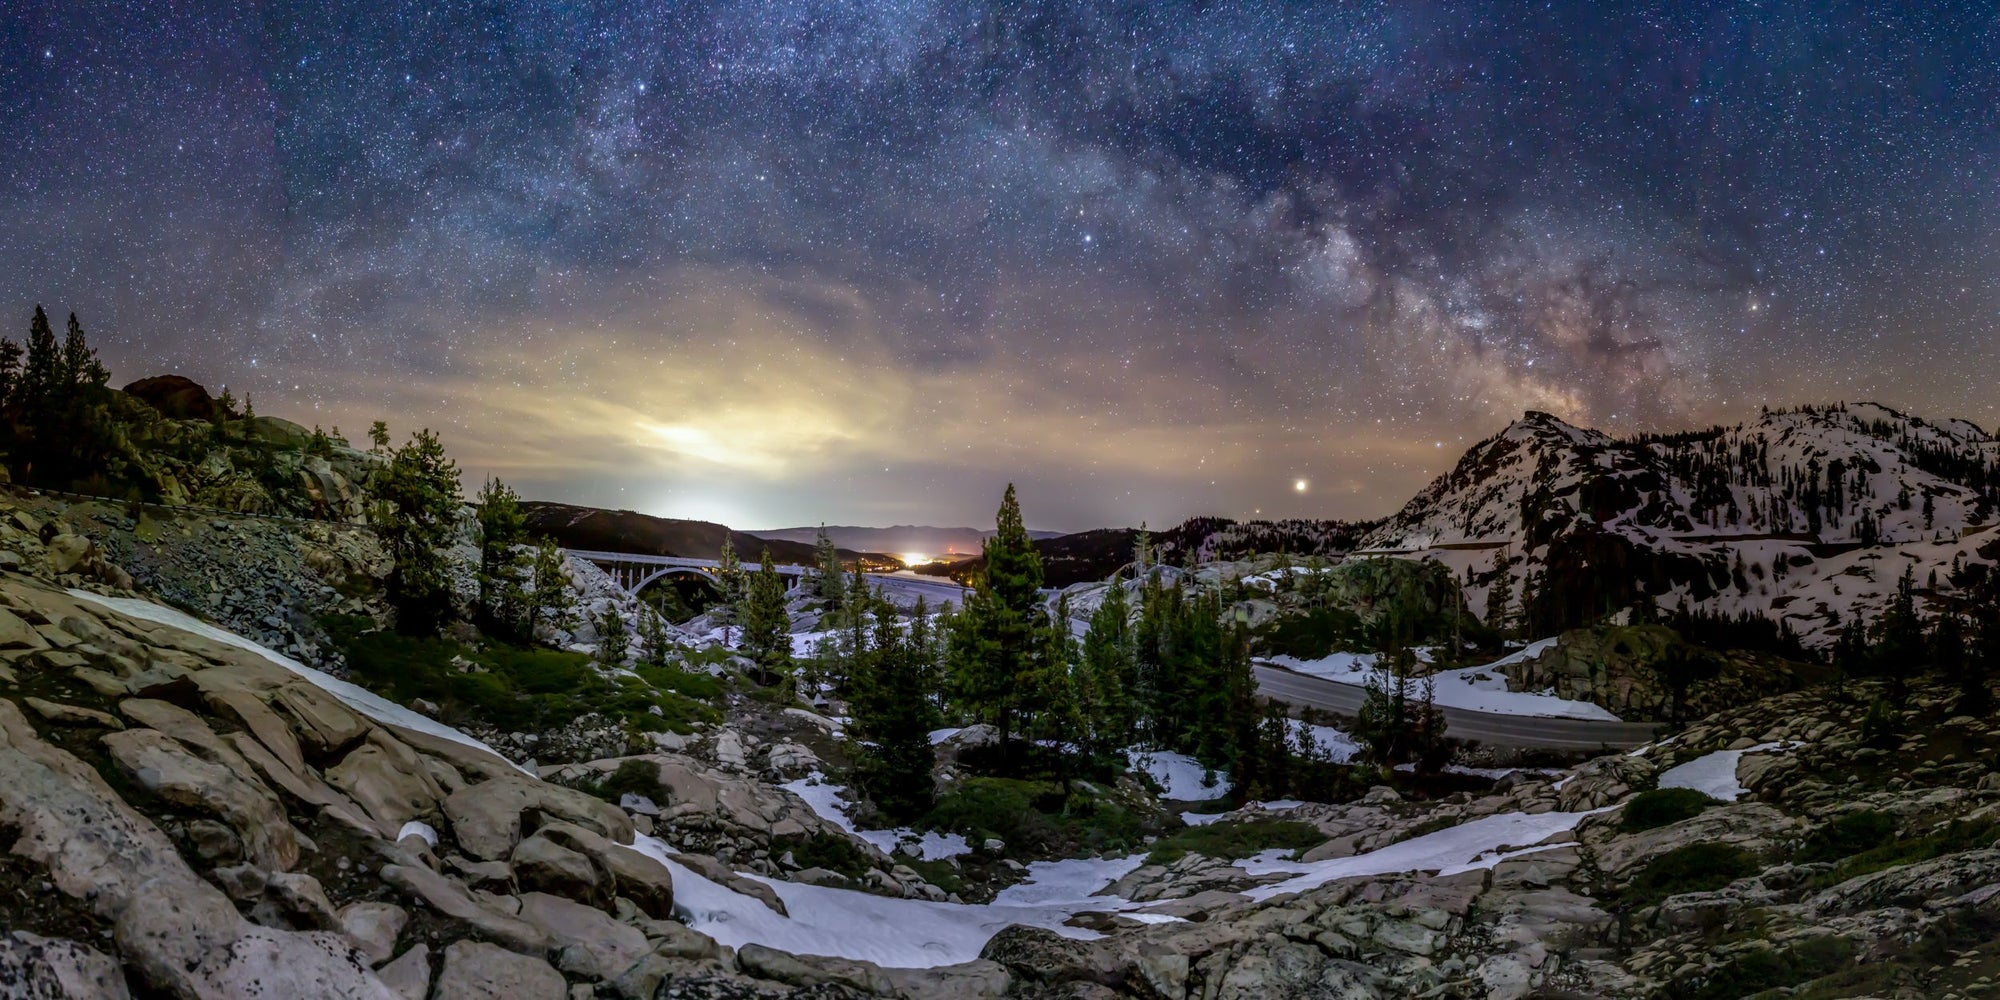 The Milky Way arches above the granite slopes on old highway 40 near Donner Lake.